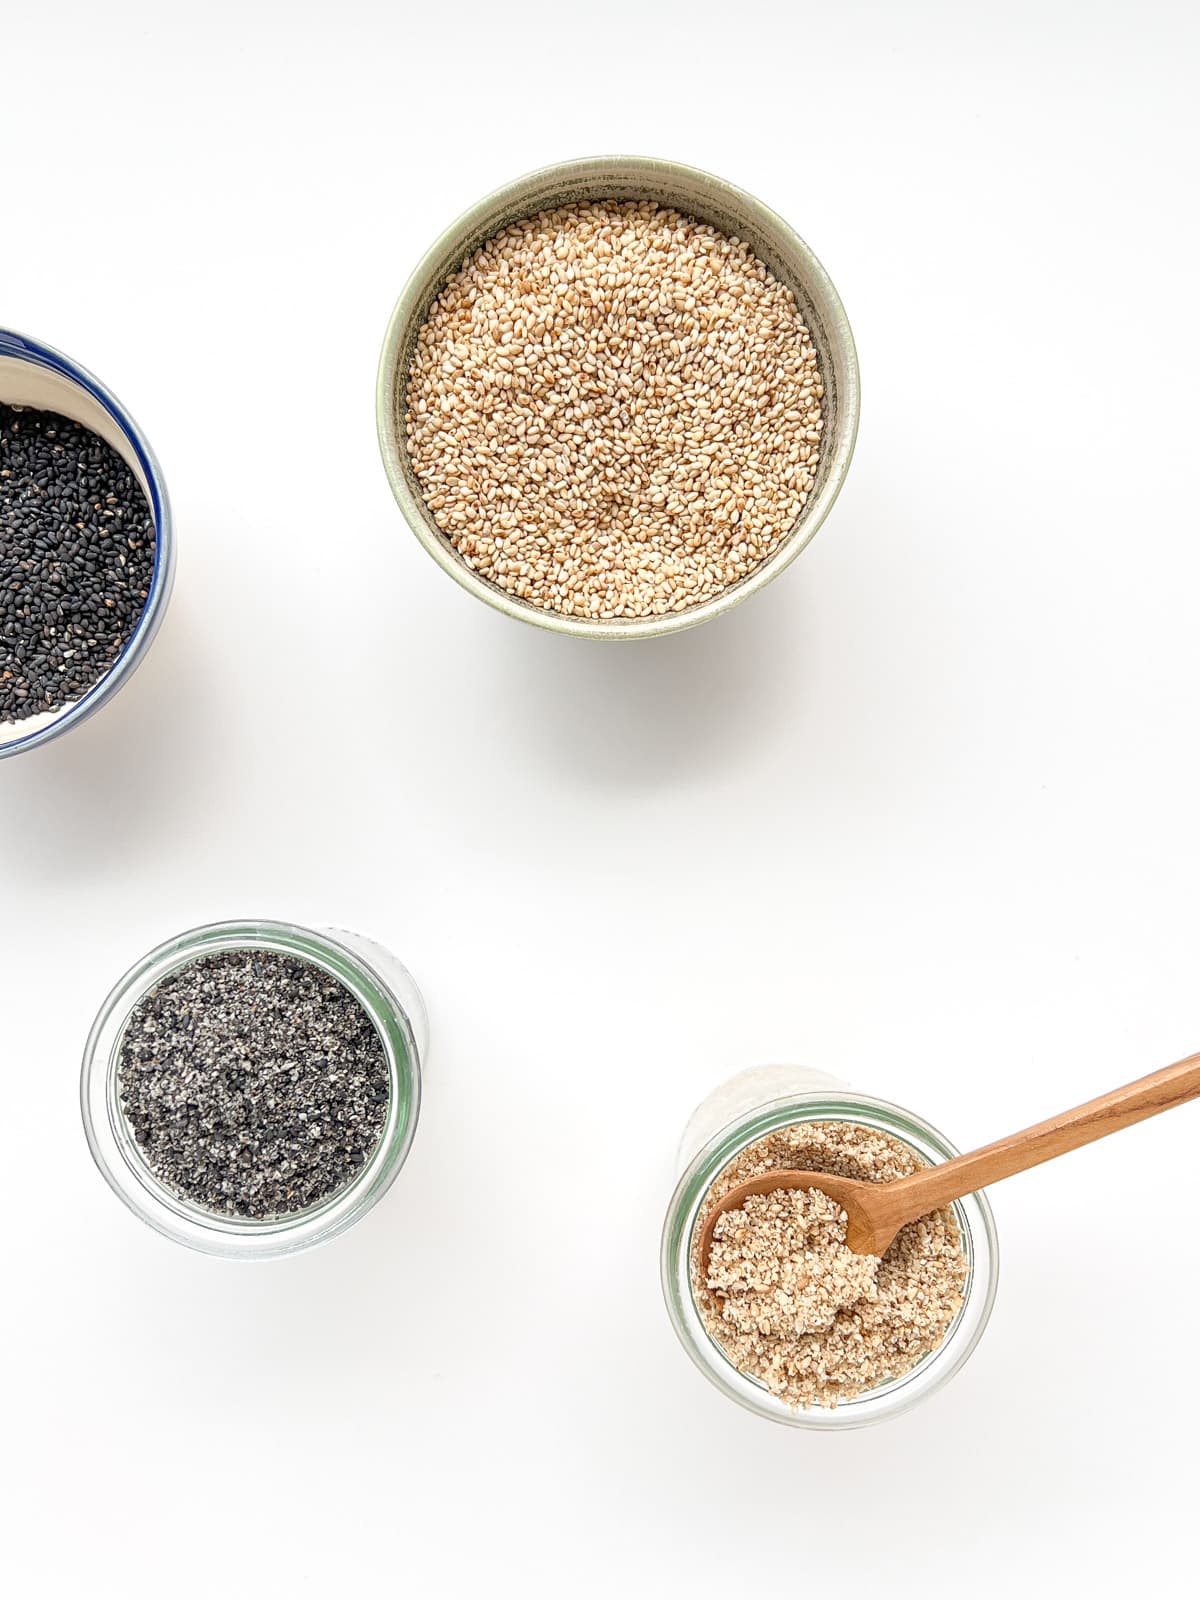 An image of four small containers against a white counter, containing white sesame seeds, black sesame seeds, black sesame seed salt, and white sesame seed salt.